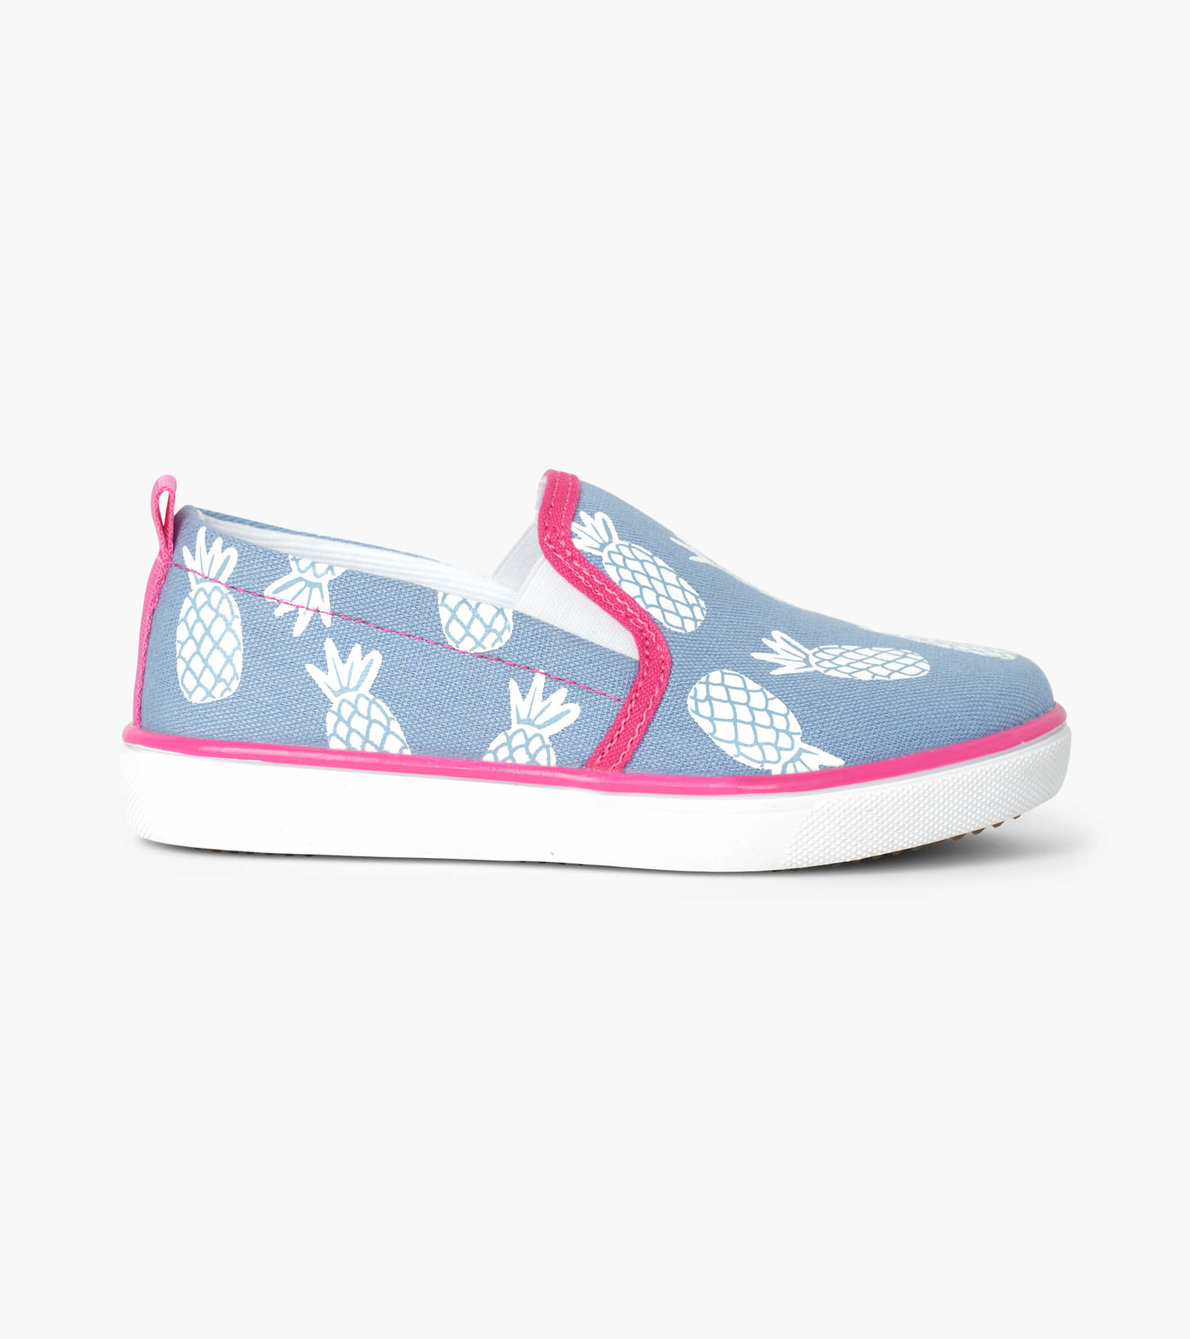 View larger image of Party Pineapples Slip On Sneakers